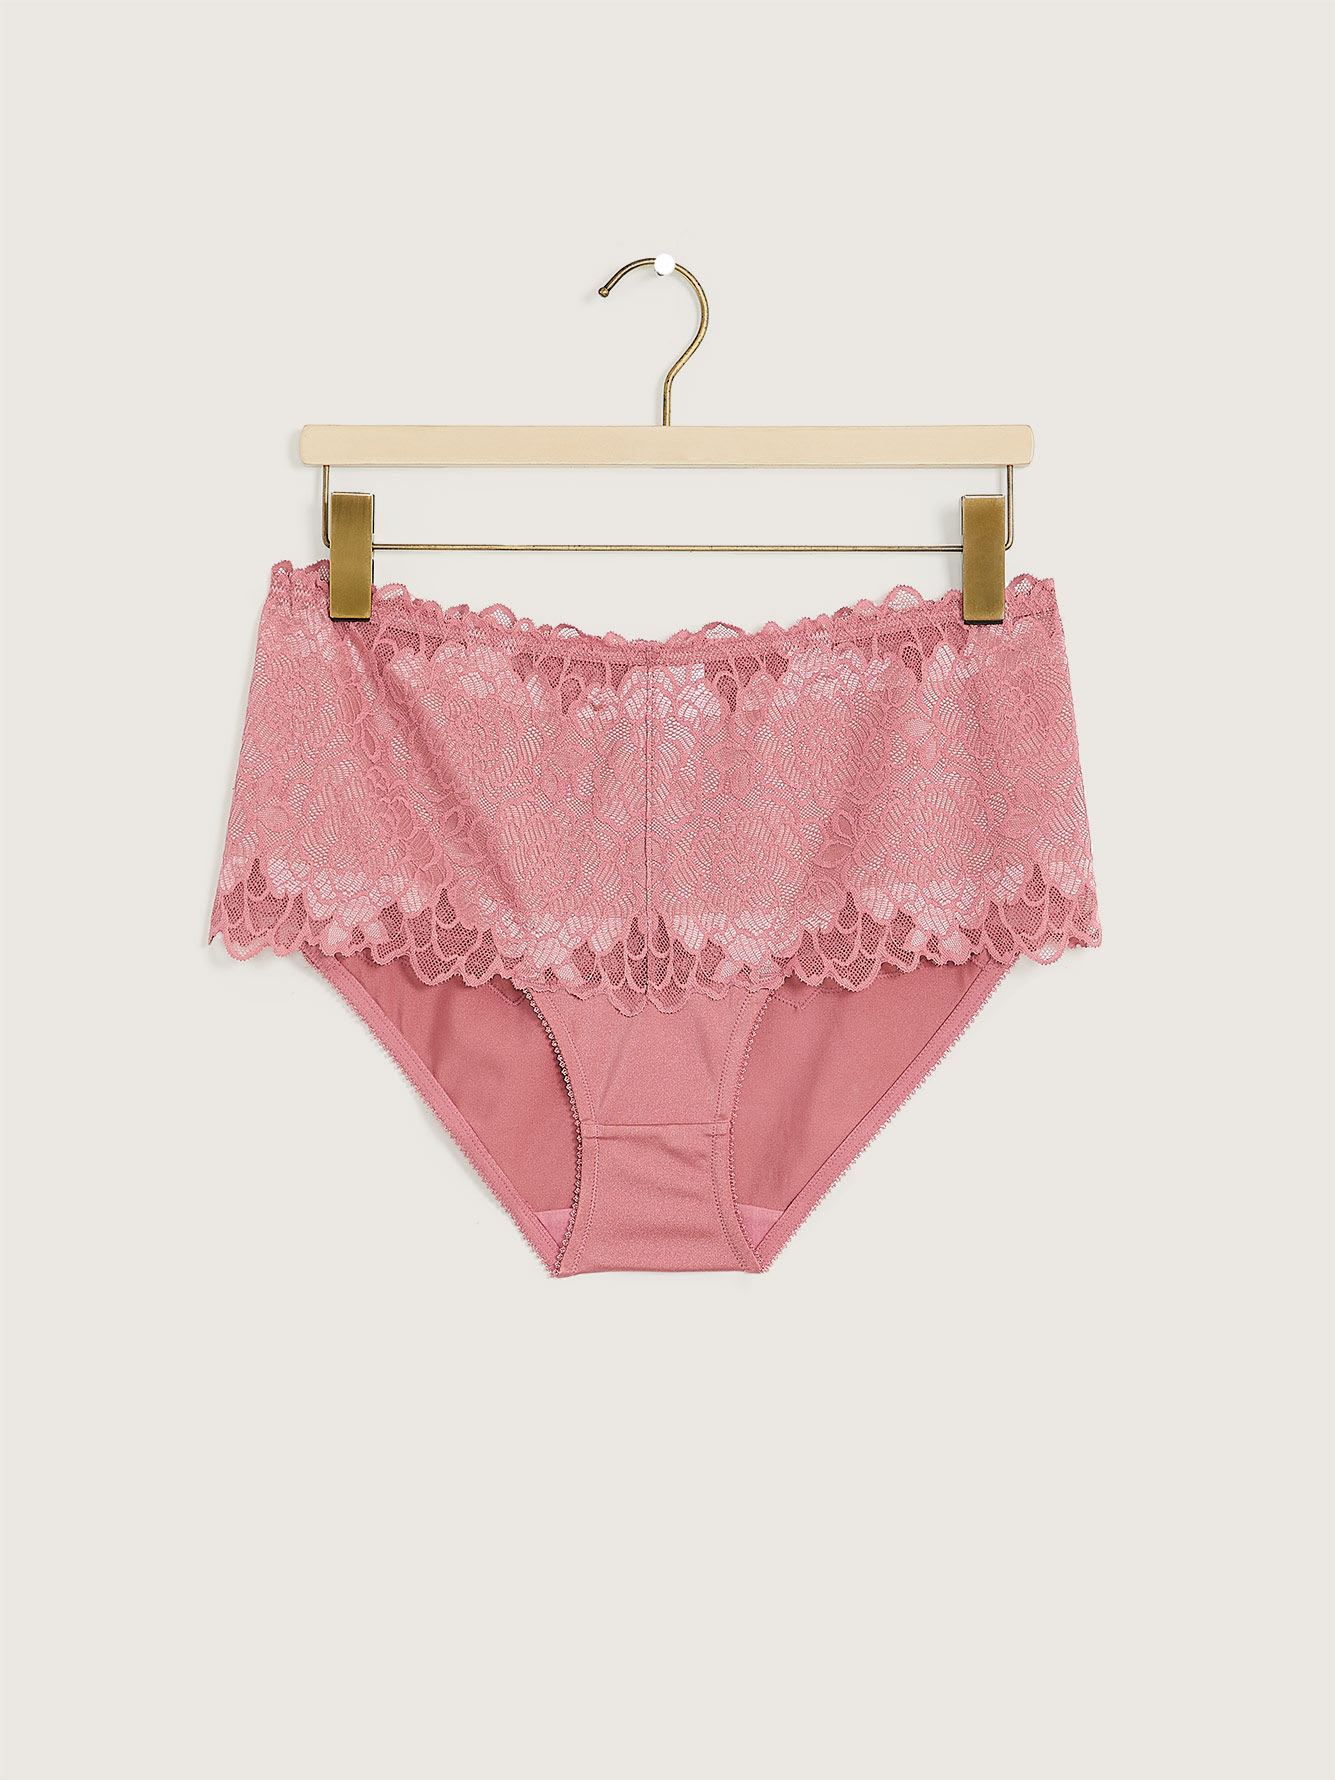 Femme Couture Full Brief with Lace Waistband - Déesse Collection